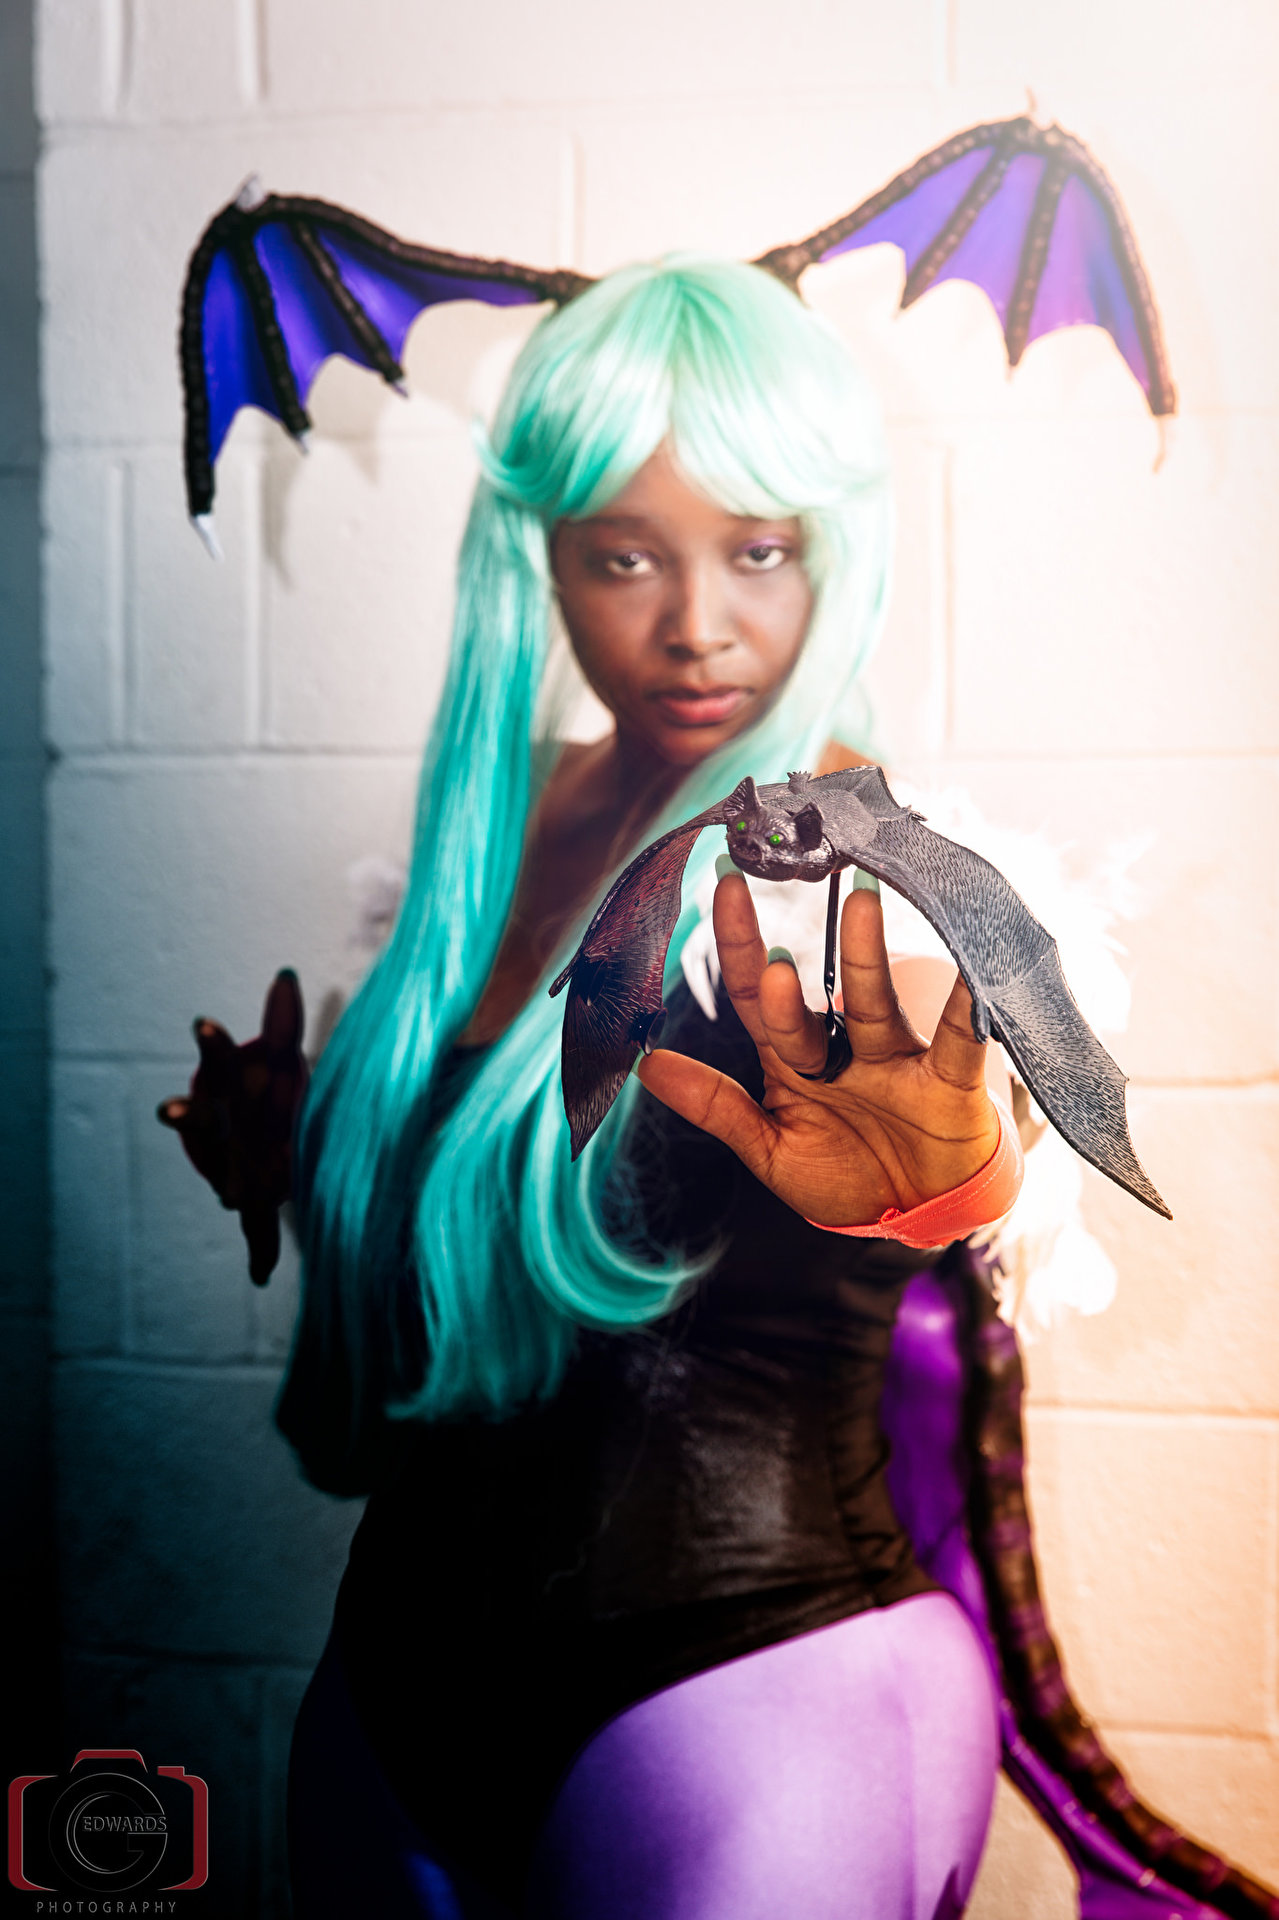 Cospix.net photo featuring Lilhevn Cosplay